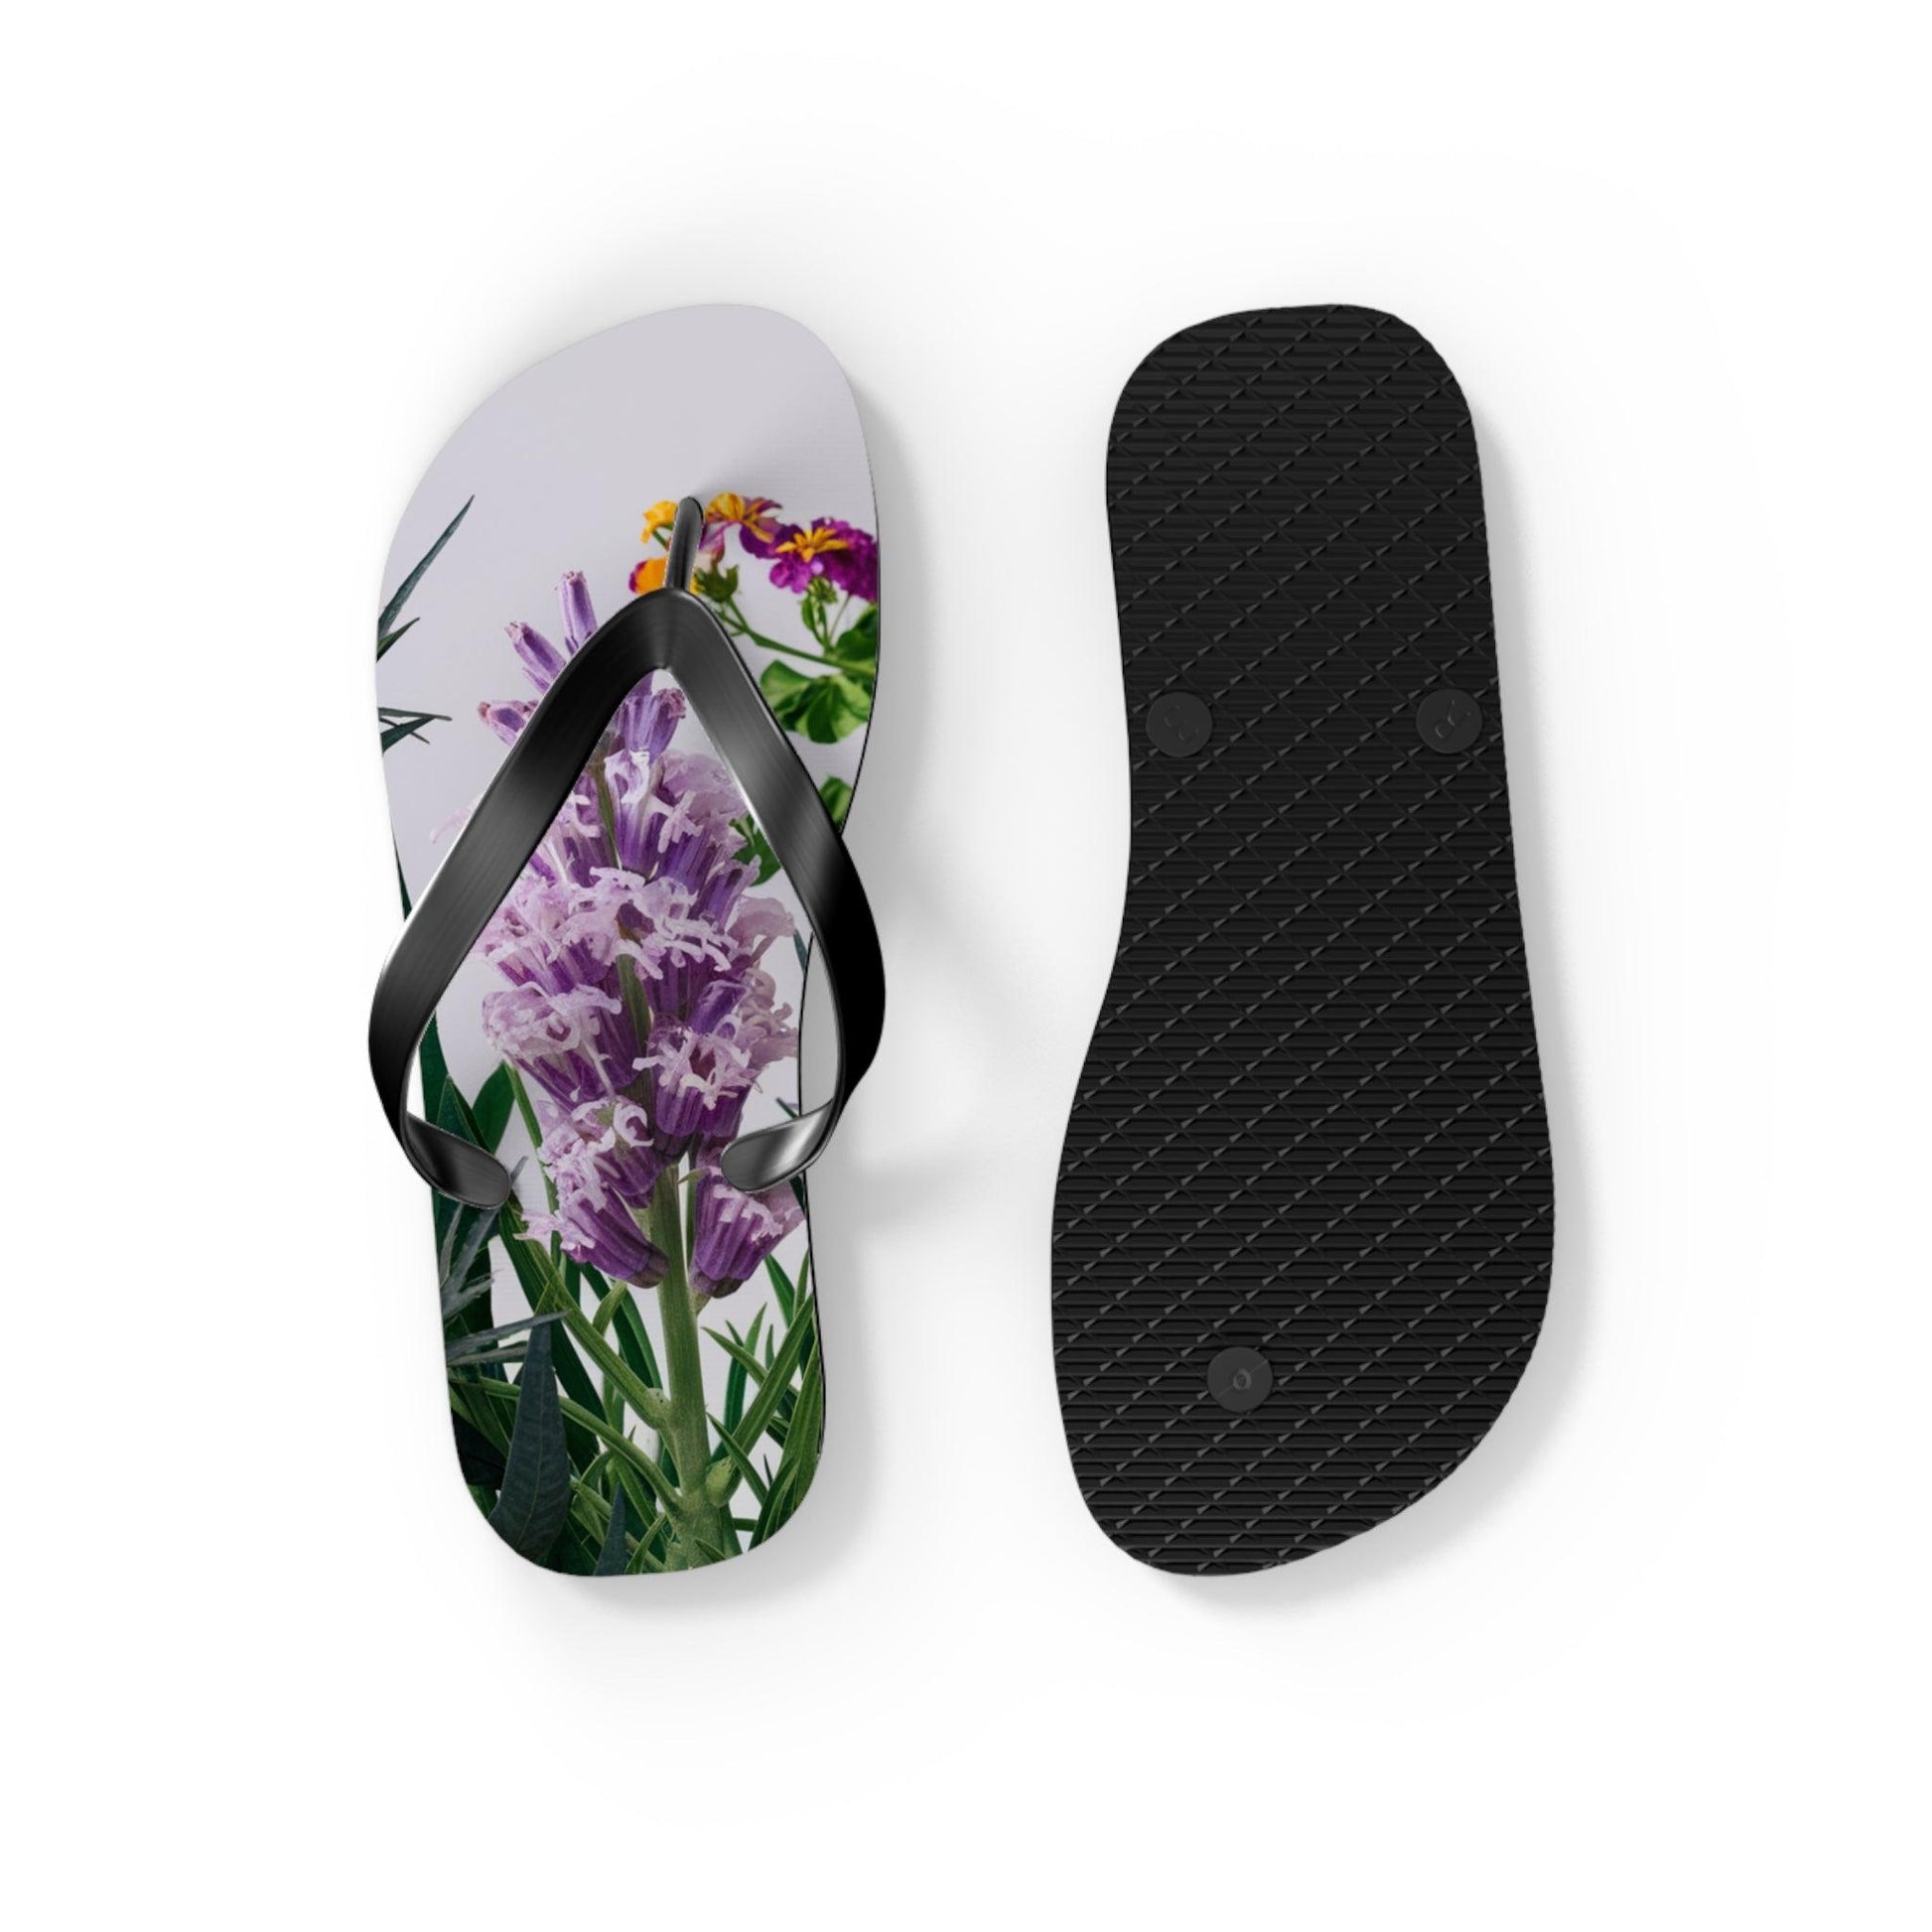 Sea Lavendar with purple hues flower bouquet Inspired Flip Flops, Express Your Beach Loving Self - Coastal Collections